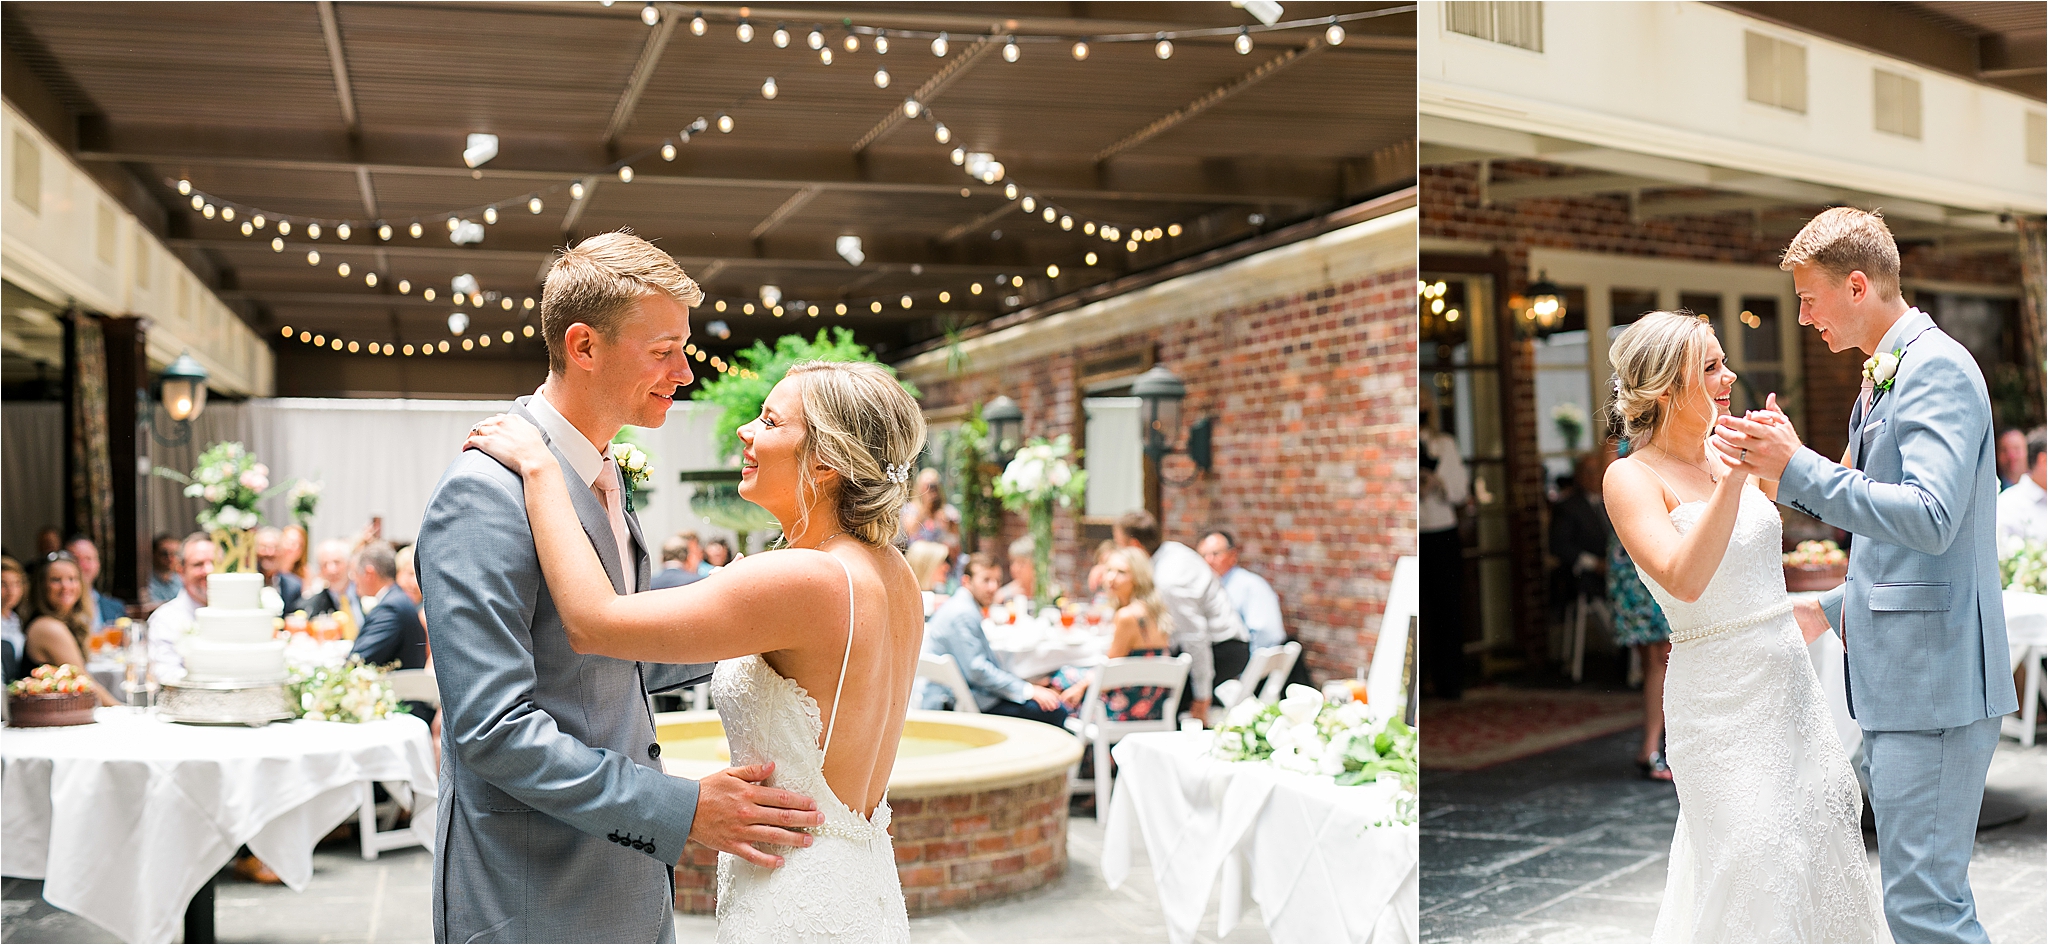 A newly married couple shares their first dance as husband and wife in their garden reception at III Forks Dallas 